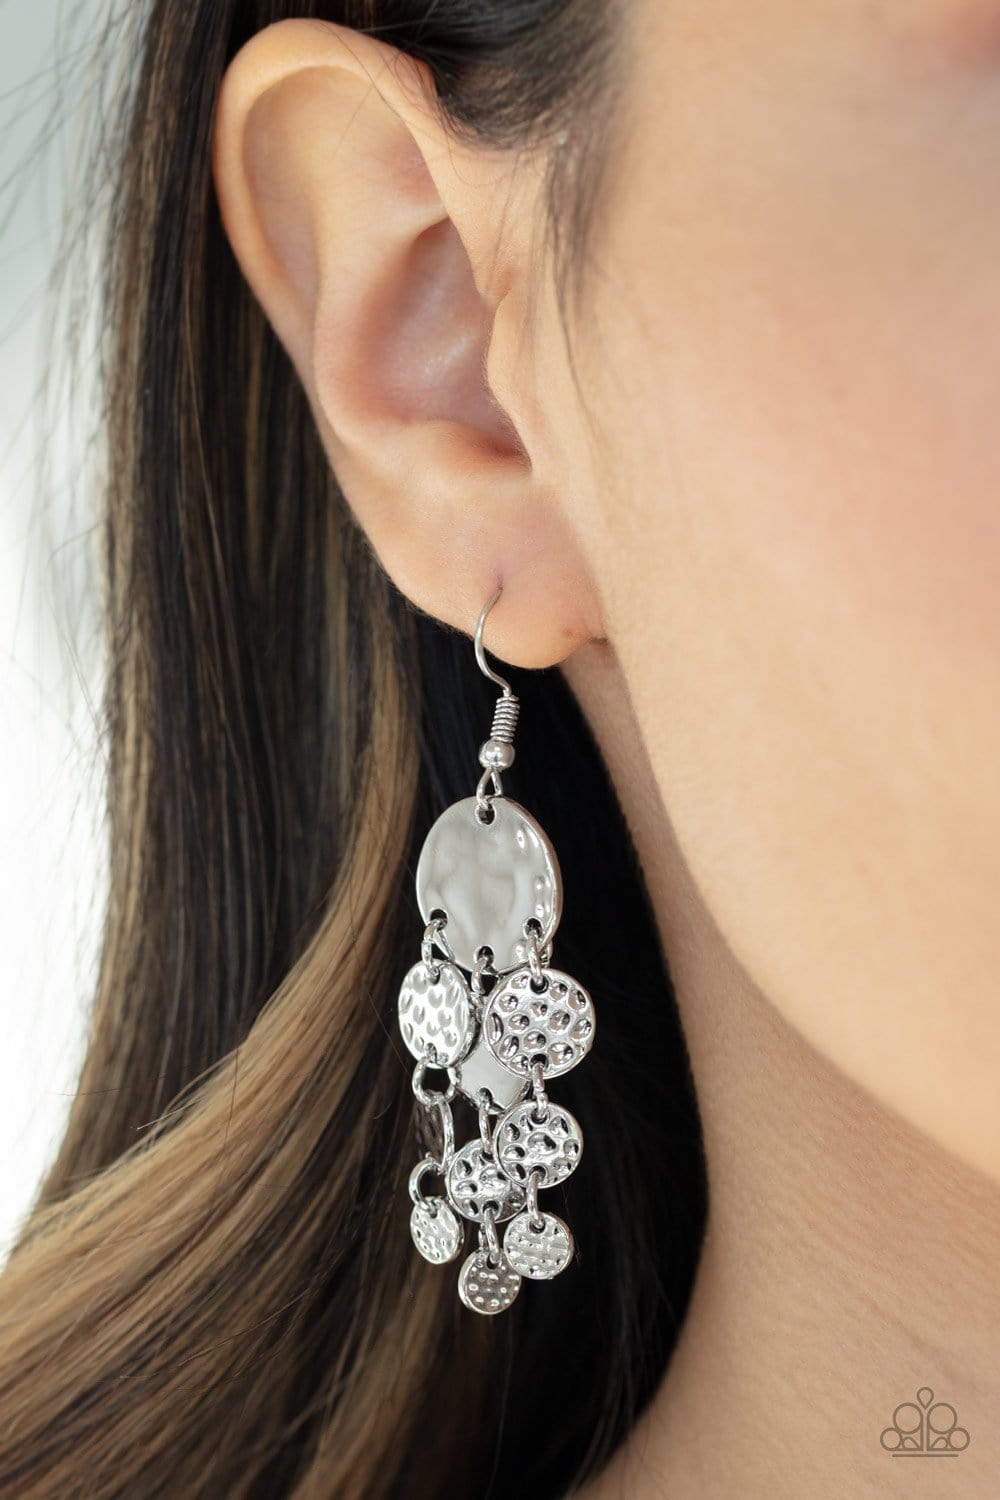 Paparazzi: Do Chime In - Silver Earrings - Jewels N’ Thingz Boutique